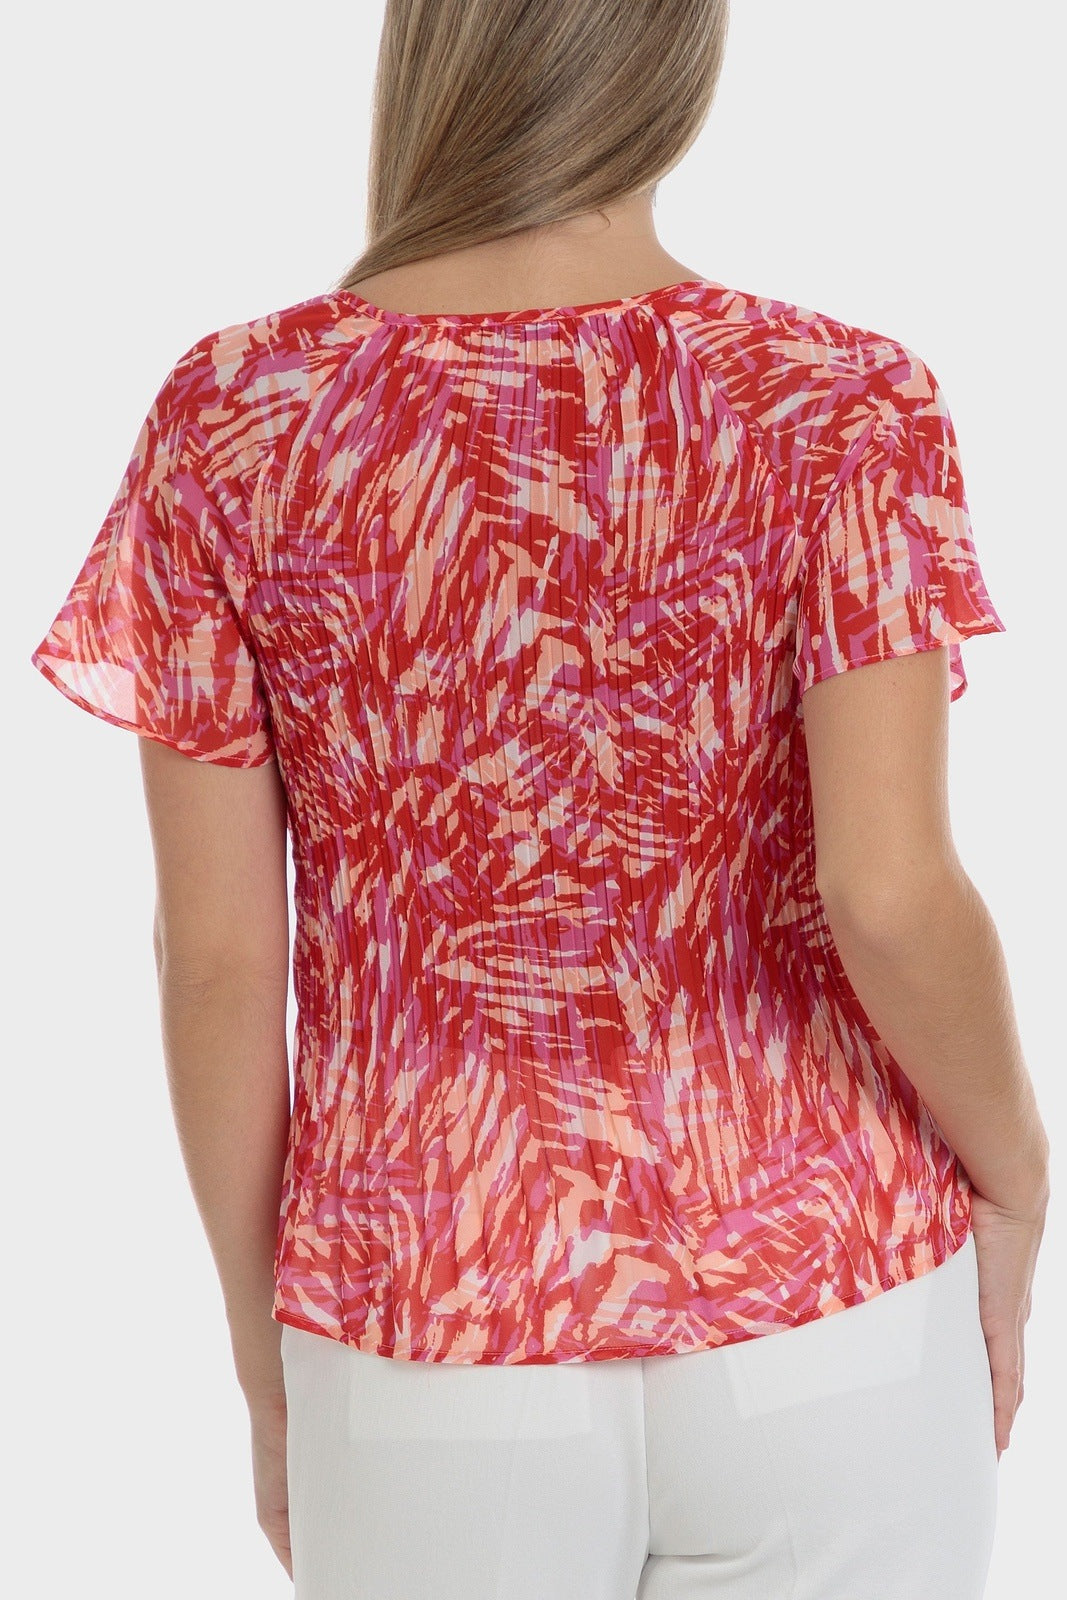 Punt Roma Pleated Top - Red 2 Shaws Department Stores